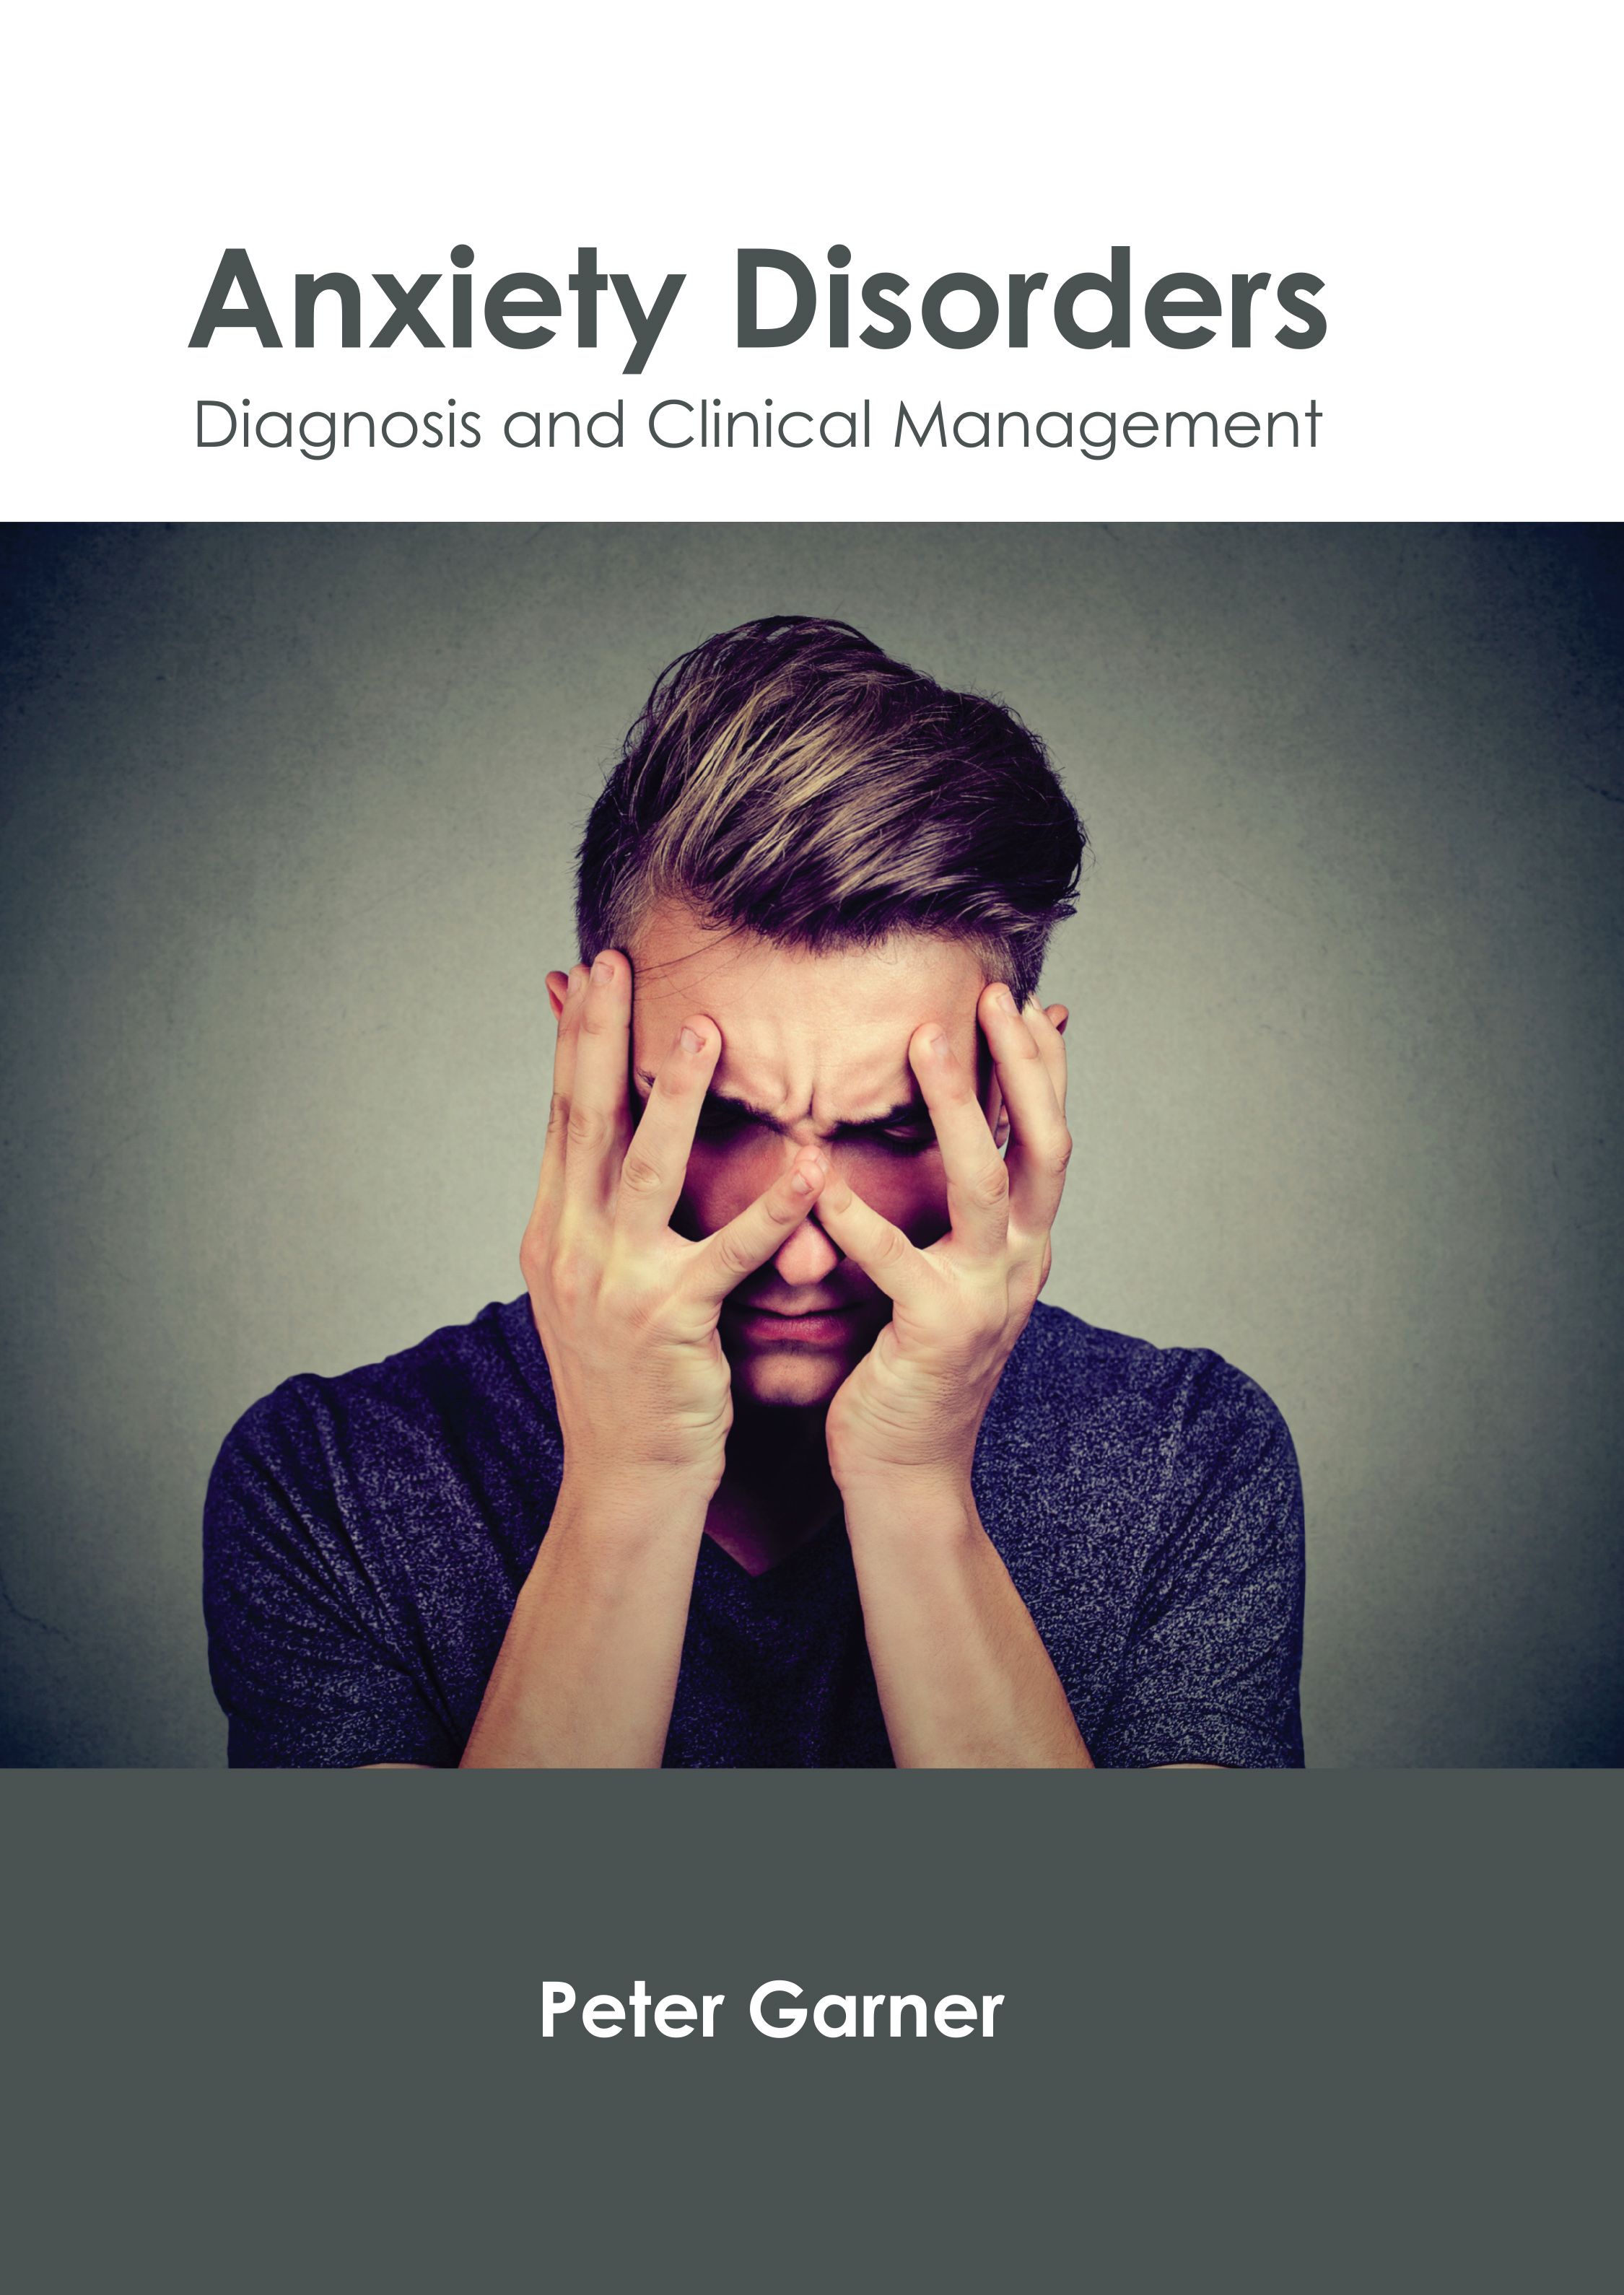 ANXIETY DISORDERS: DIAGNOSIS AND CLINICAL MANAGEMENT